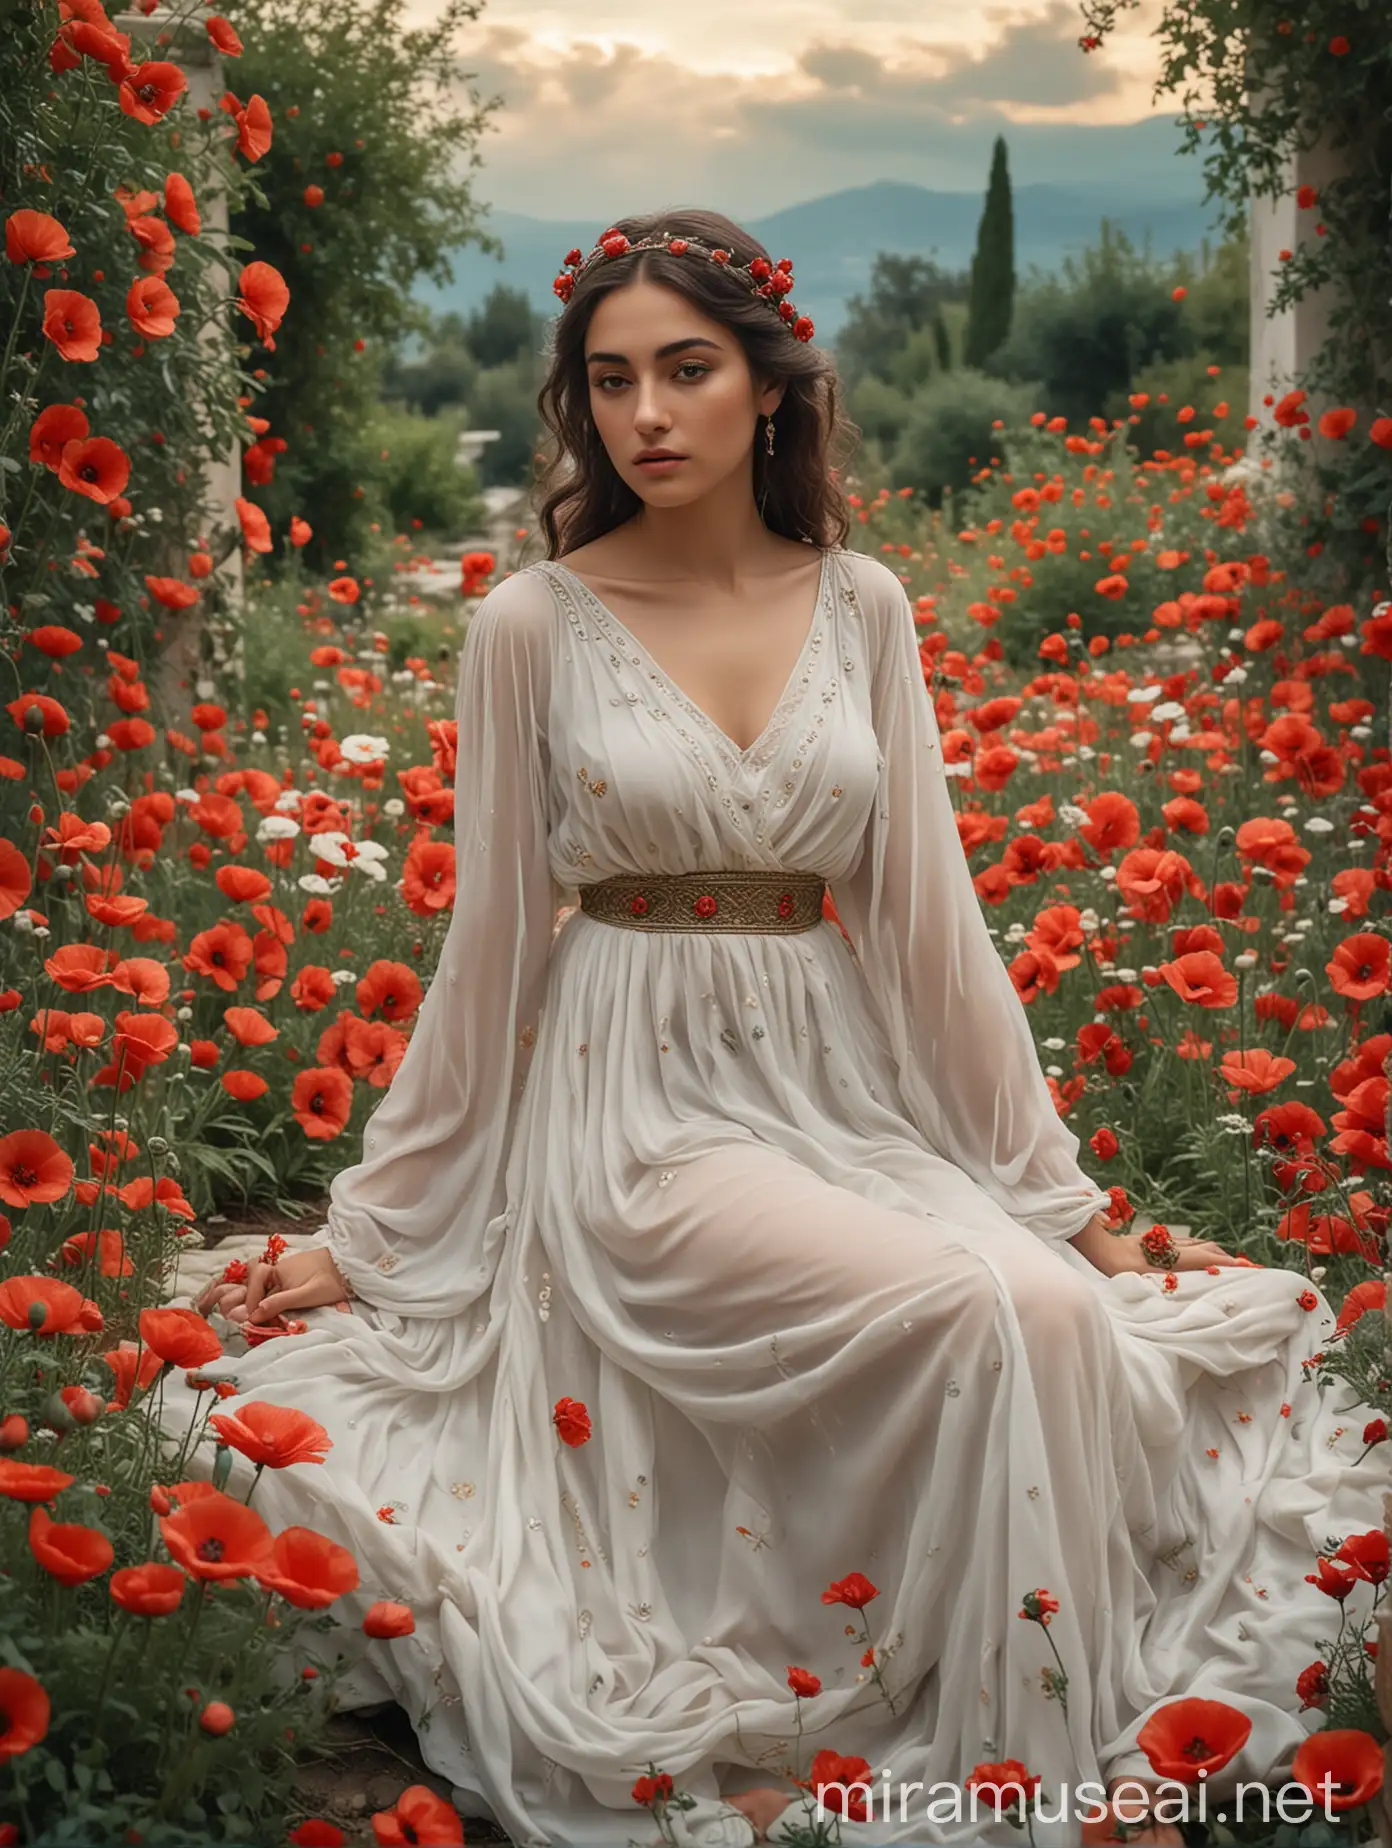 Aslıhan Malbora as Pasithea, the goddess of relaxation and dreams. She is sitting in a garden filled with exotic flowers and calming plants. The environment is intricately drawn with ethereal clouds. The color palette includes soft hues, with a diffuse light creating a magical and tranquil atmosphere. She is crowned by red poppies flowers. She is wearing a white and translucent Greek dress.